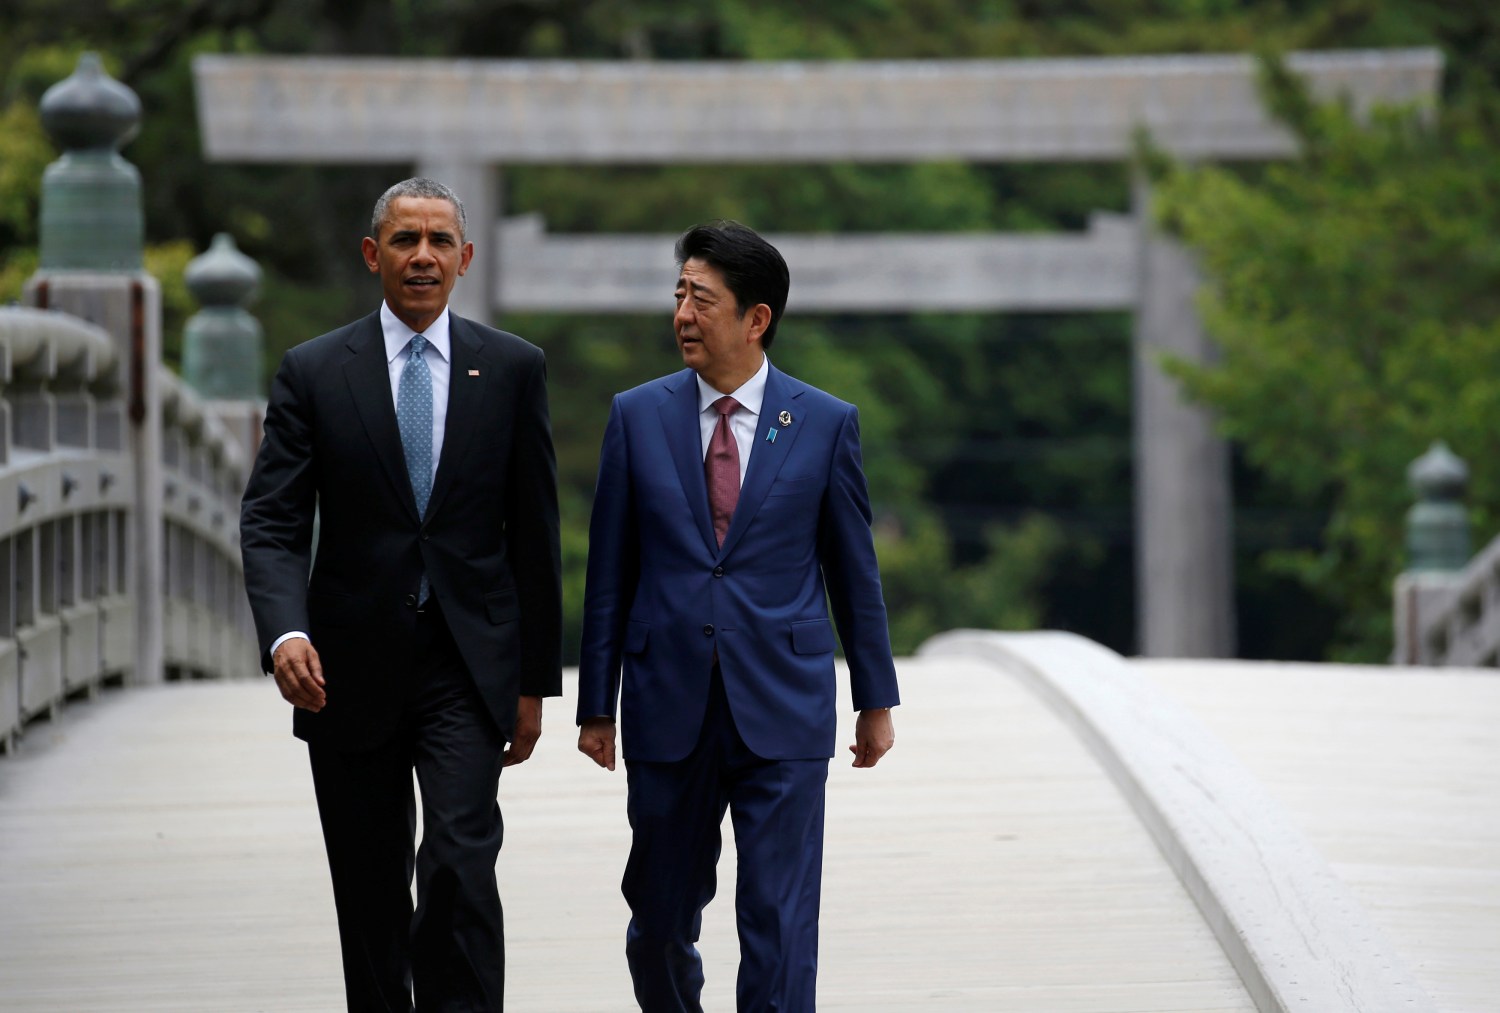 U.S. President Barack Obama (L) talks with Japanese Prime Minister Shinzo Abe on Ujibashi bridge as they visit Ise Grand Shrine in Ise, Mie prefecture, Japan, May 26, 2016, ahead of the first session of the G7 summit meetings. REUTERS/Toru Hanai - RTSFY3V